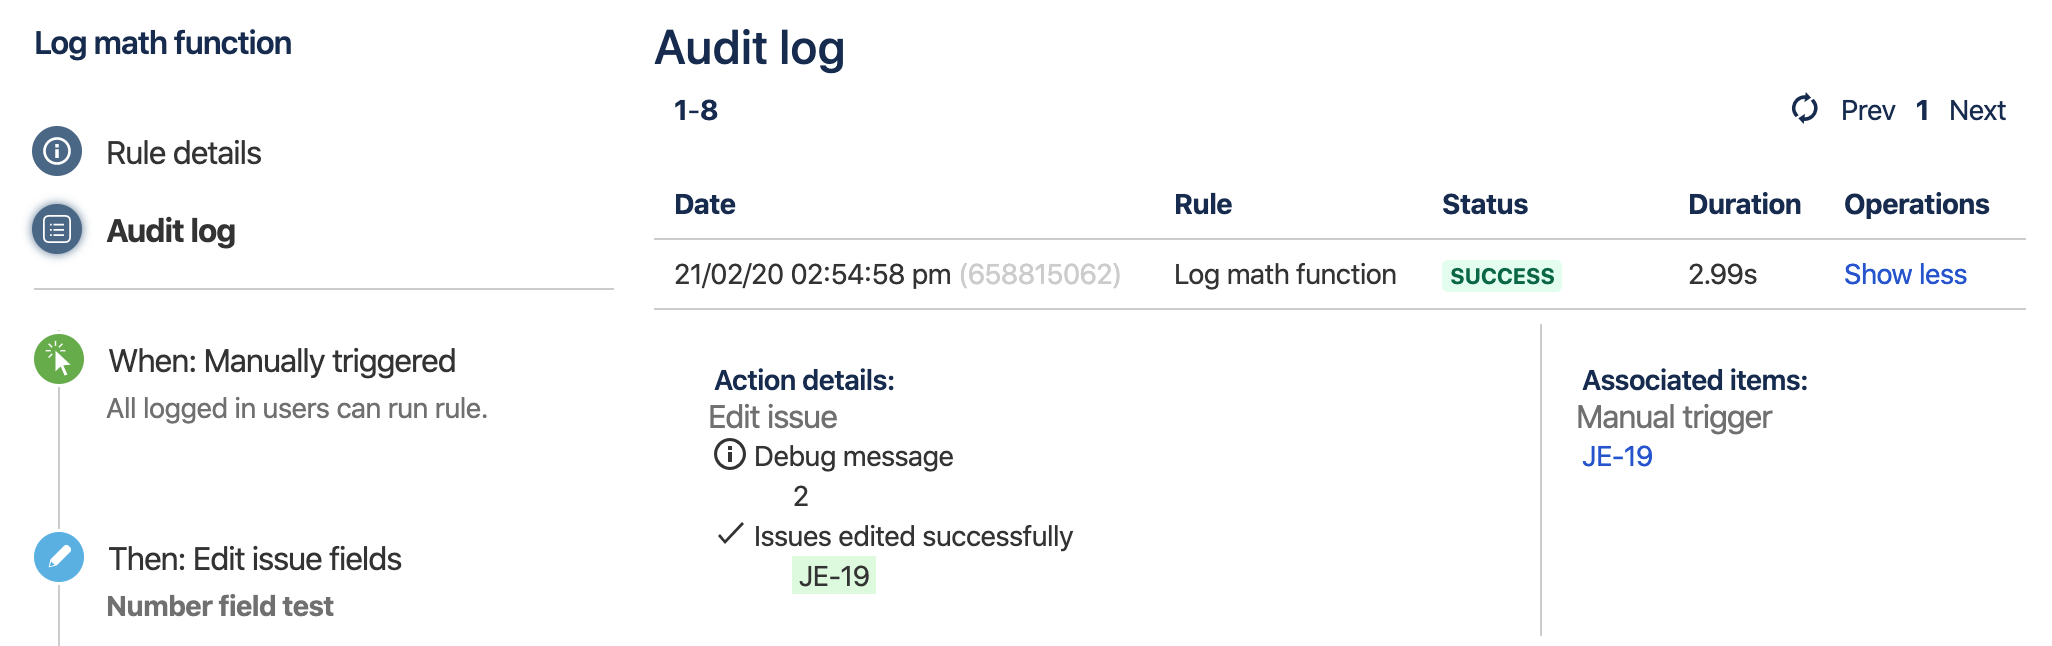 Audit log for an automation rule. The rule has a status of "Success" and shows "Debug message 2.